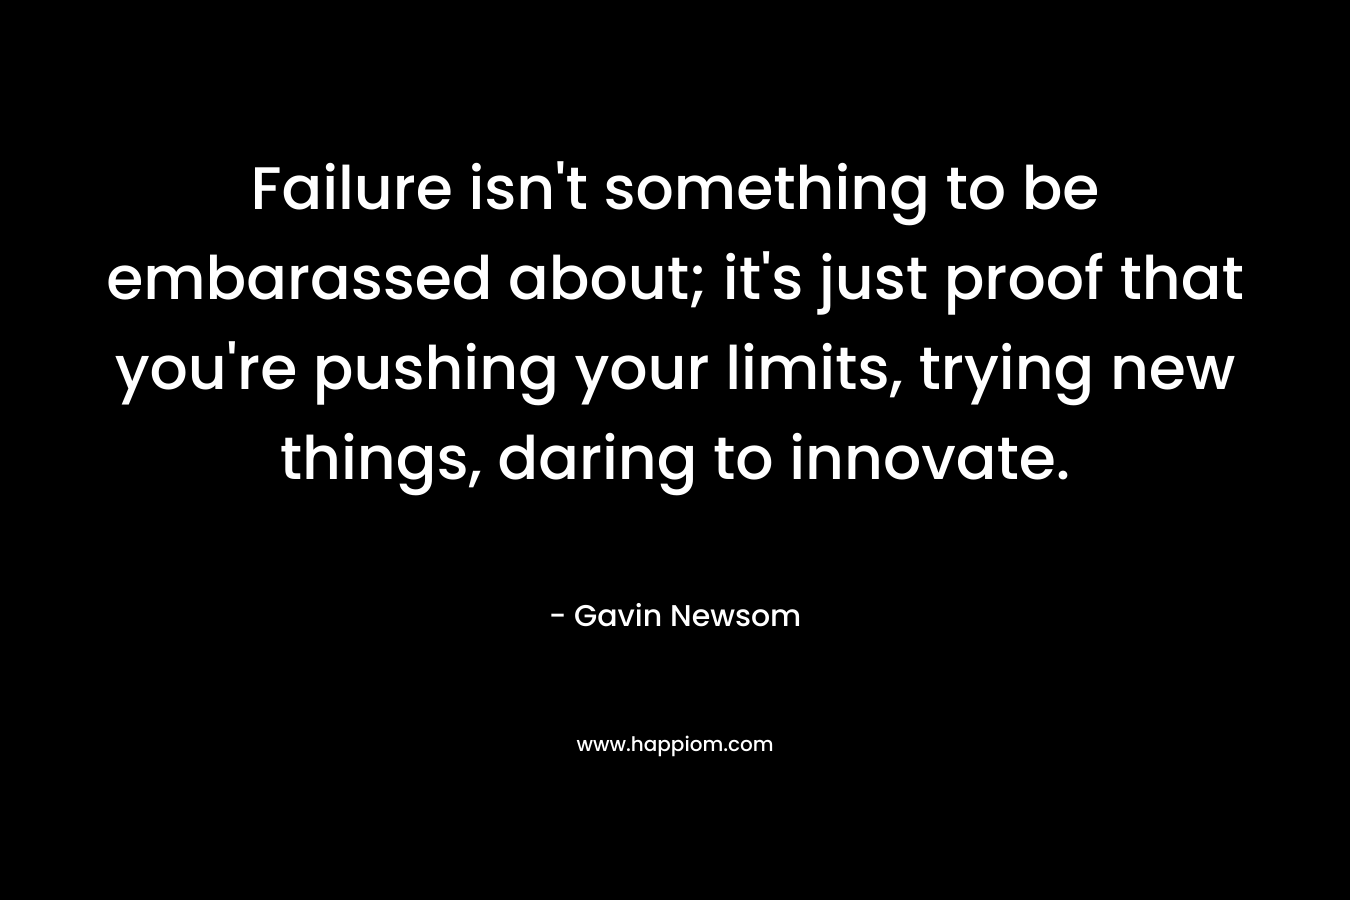 Failure isn’t something to be embarassed about; it’s just proof that you’re pushing your limits, trying new things, daring to innovate. – Gavin Newsom